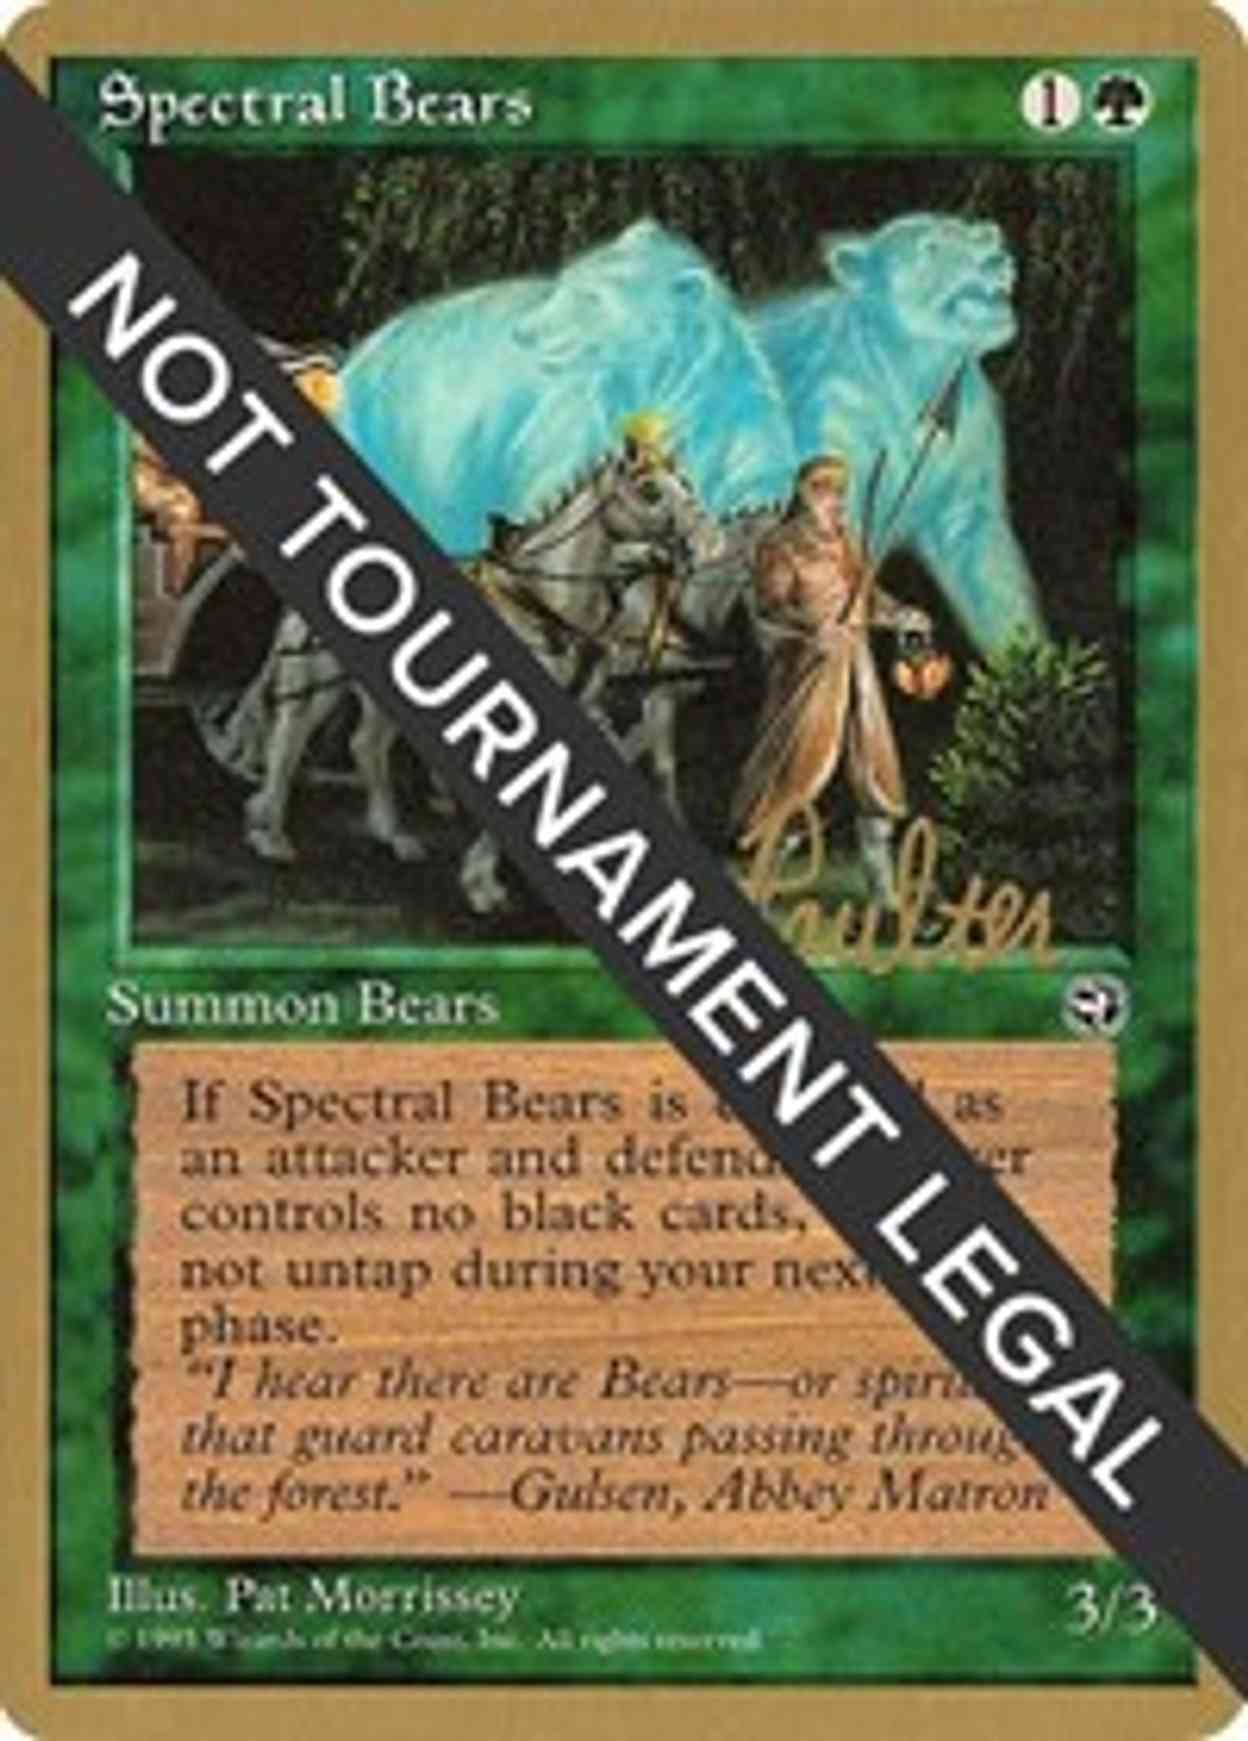 Spectral Bears - 1996 Preston Poulter (HML) magic card front